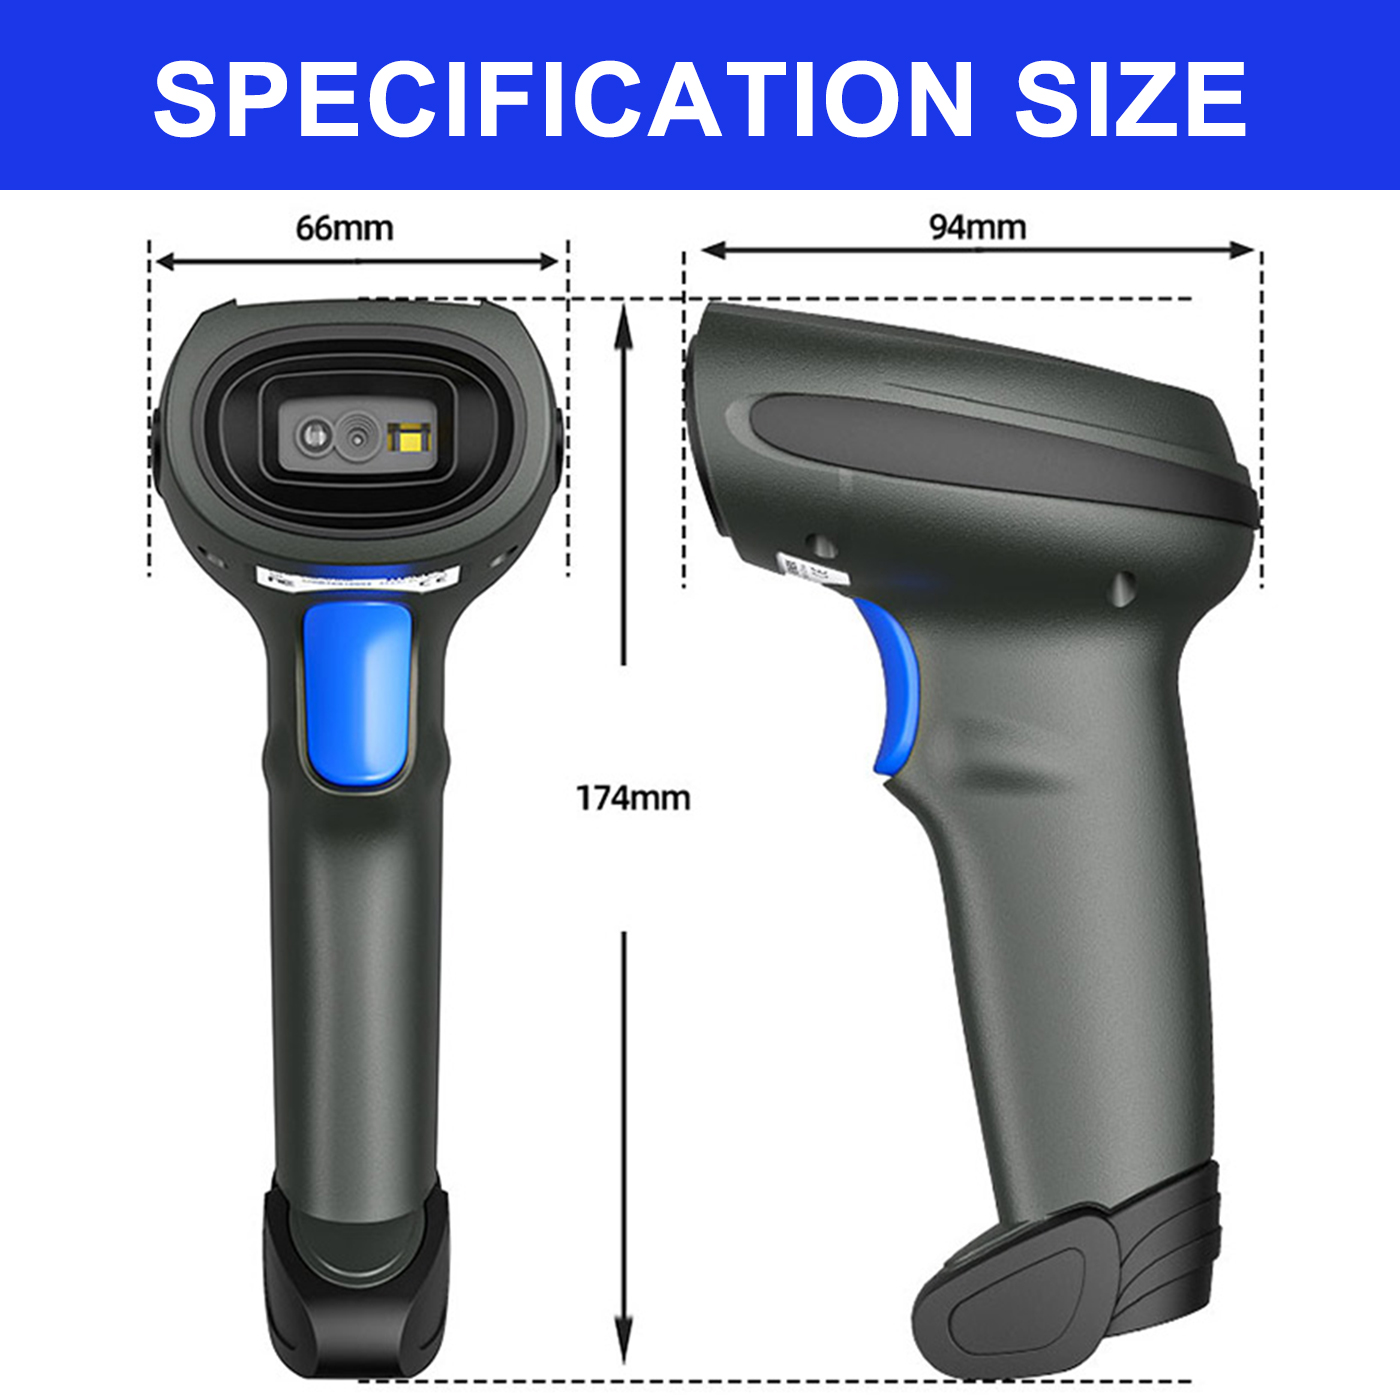 Wireless barcode scanner for legal documents